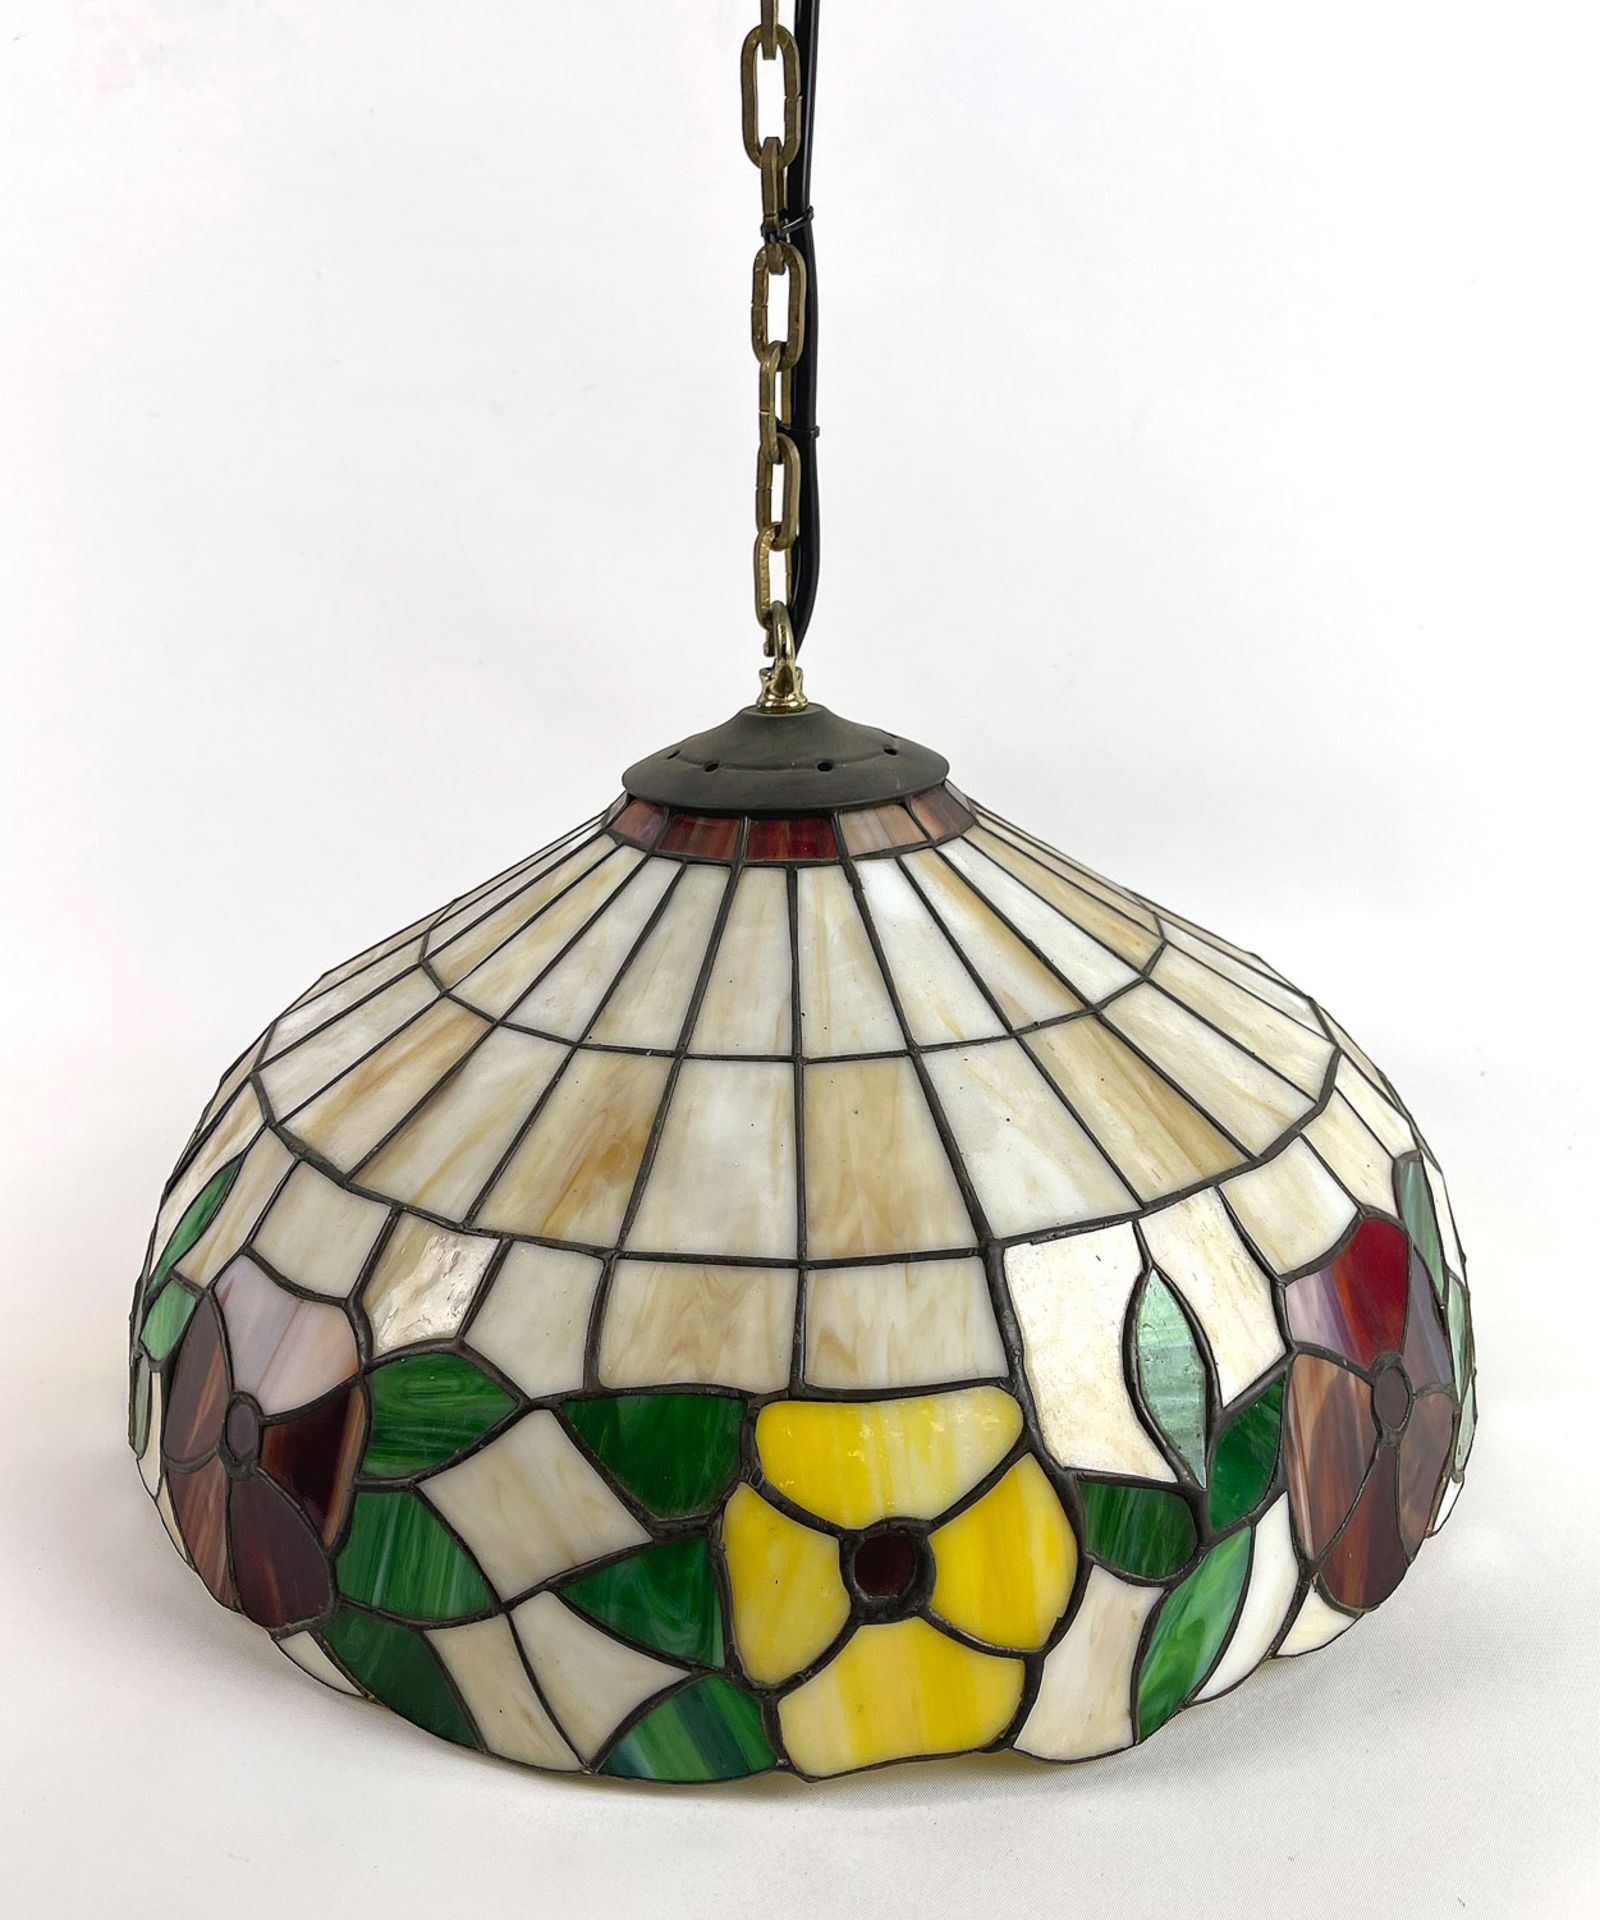 Tiffany Style Hanging Ceiling Lamp with Flower Motif